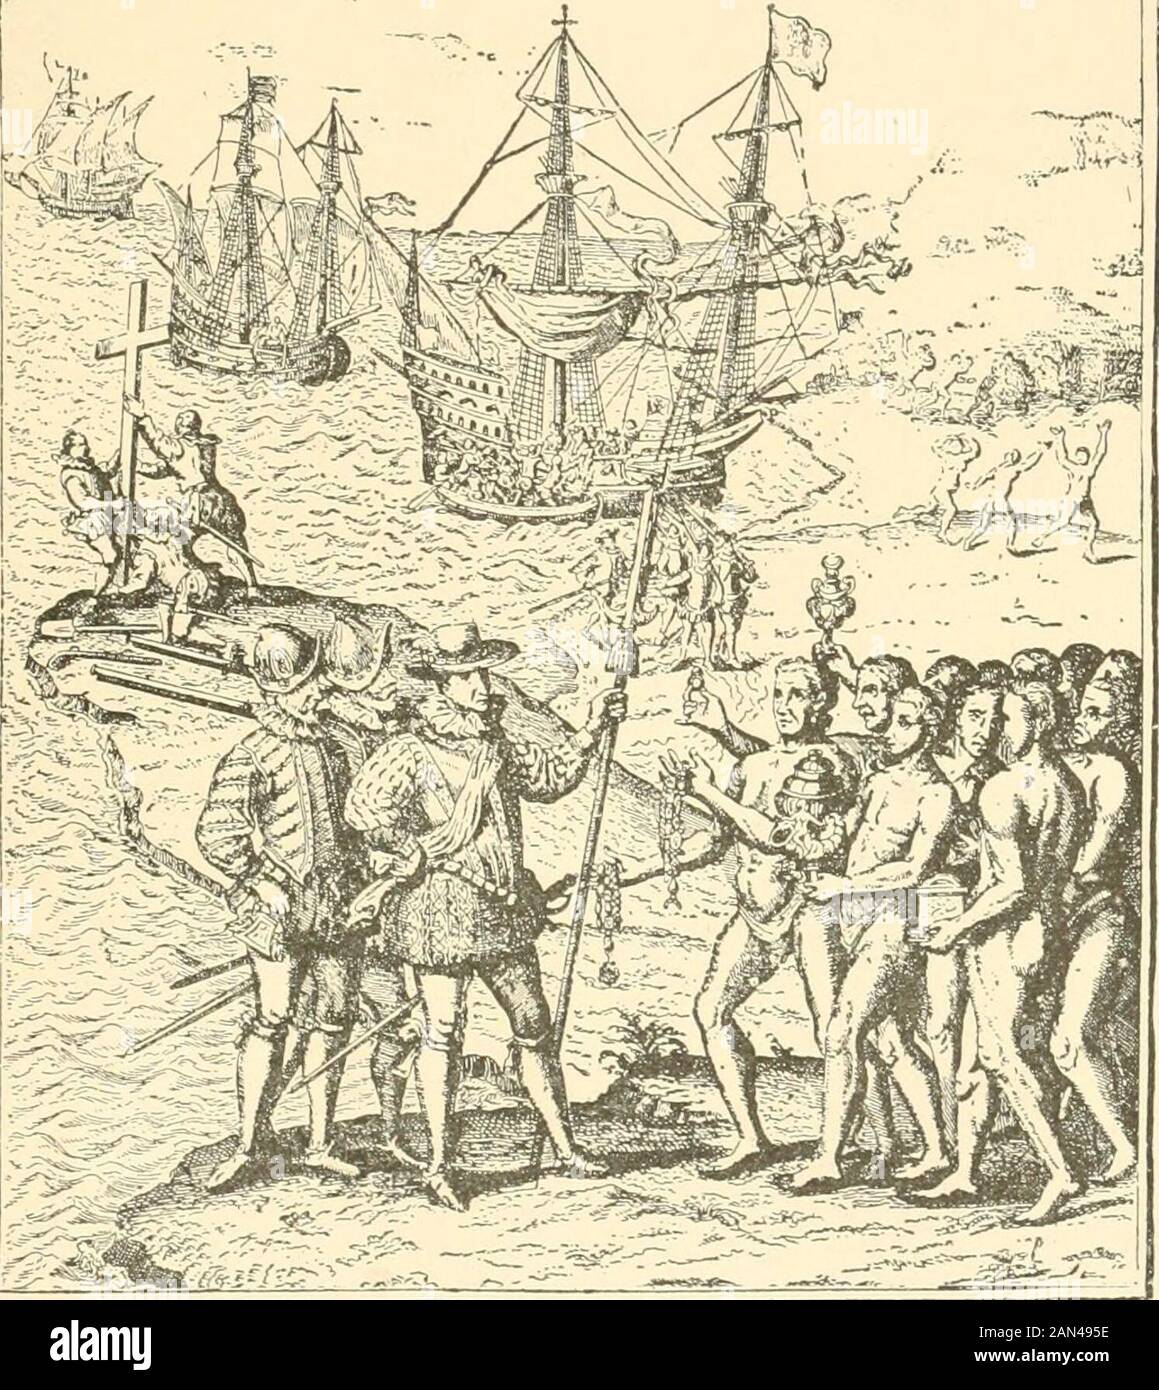 Pioneer Spaniards in North America . ate of Ojeda on his expedition to coastof Paria, 7 ; appointed Pilot Major of Spain, 25 ; question as towho first sighted mainland of America, 26 5 his account of hisvoyage in 1501, 31 ; controversy about him, 36 ; how his namewas bestowed on the Western Hemisphere, 37. ViLLAGRAN, Gaspar Perez de, nialces a daring leap and saveshis countrymen, 315. Yucatan, peninsula of, visited by Cordova, 129 ; massive ruins,130 j these not very ancient, 335. Zaldivar, Juan de, an officer of Juan de Onate, 305 ; visits Acoma, 305 ; is killed by the natives, 307.Zaldivar, Stock Photo